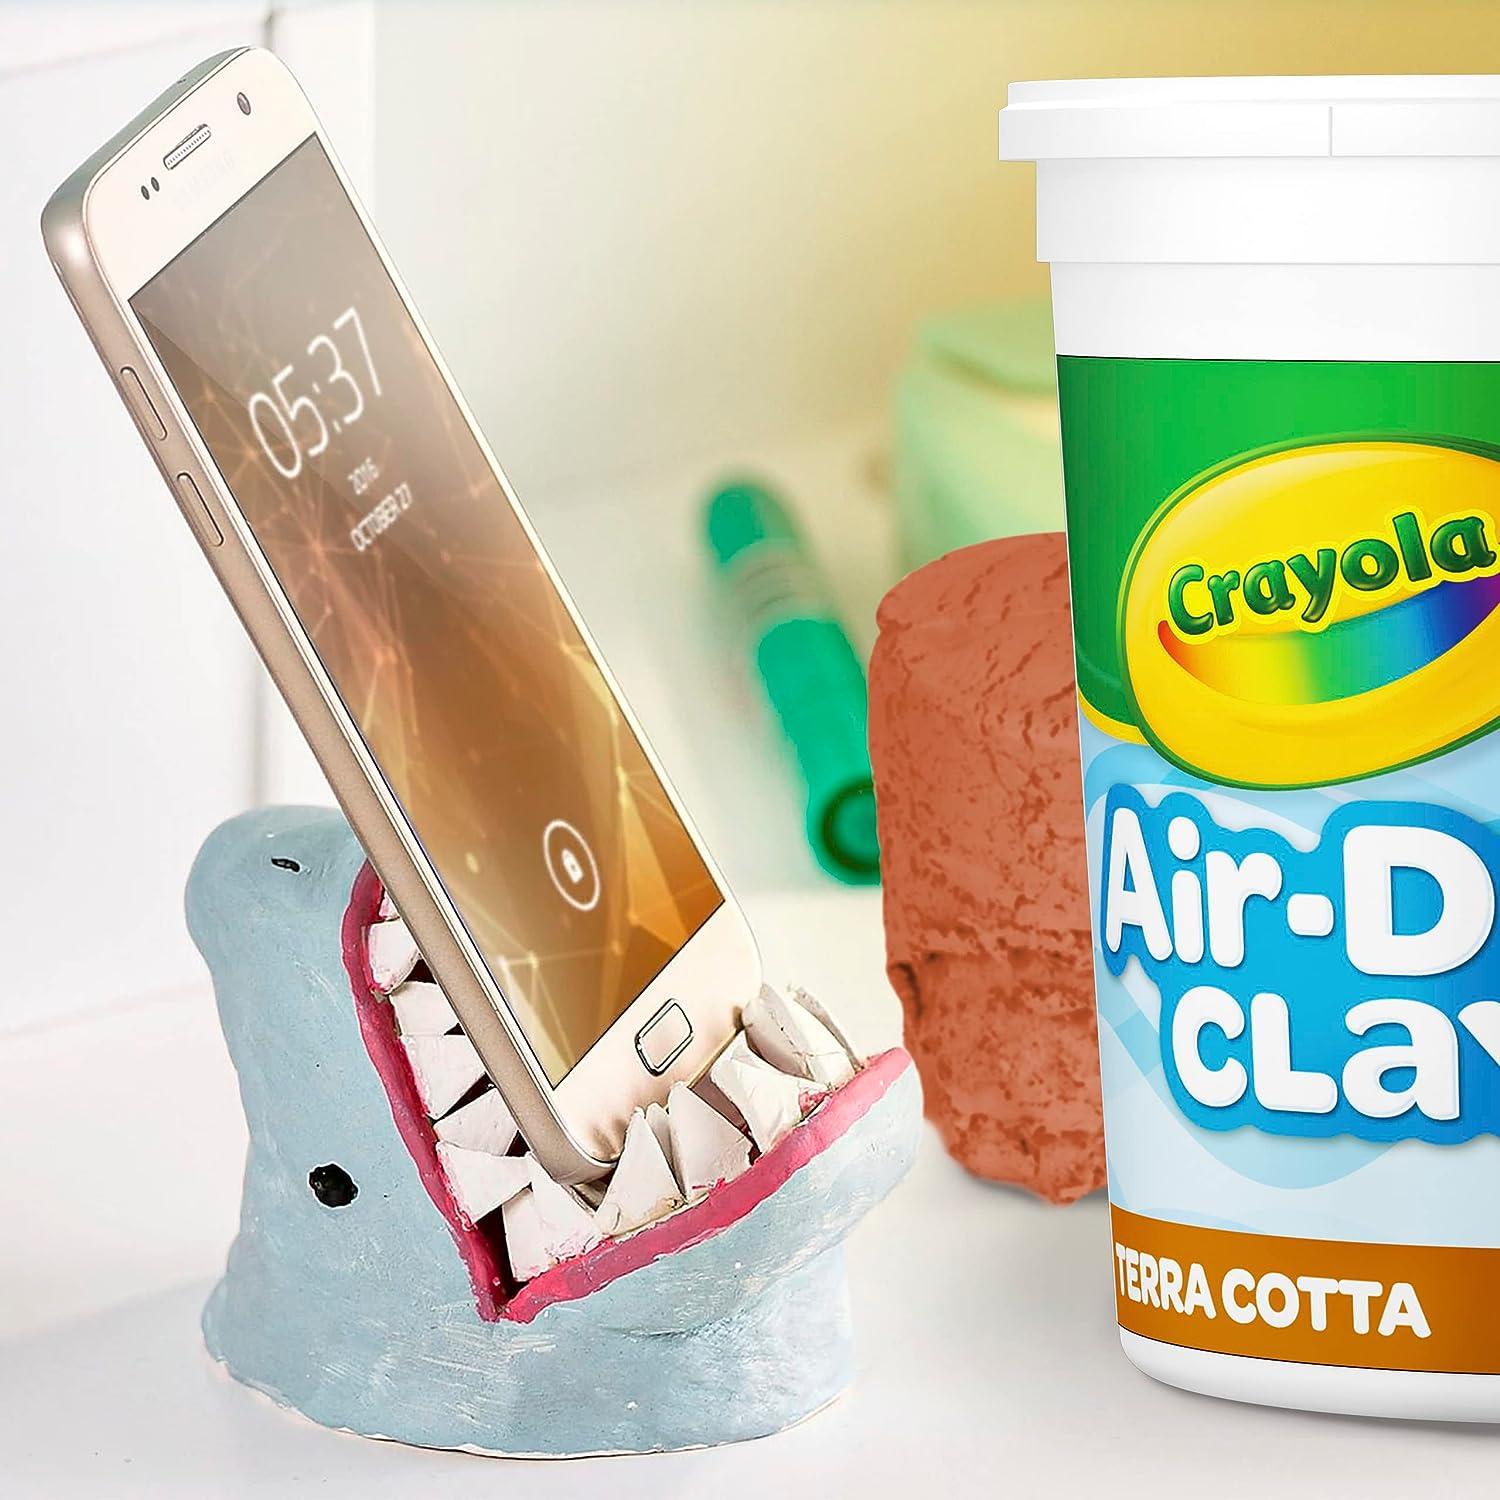 Crayola Air-Dry Clay Disintegrating Over the Years - Arts & Crafts